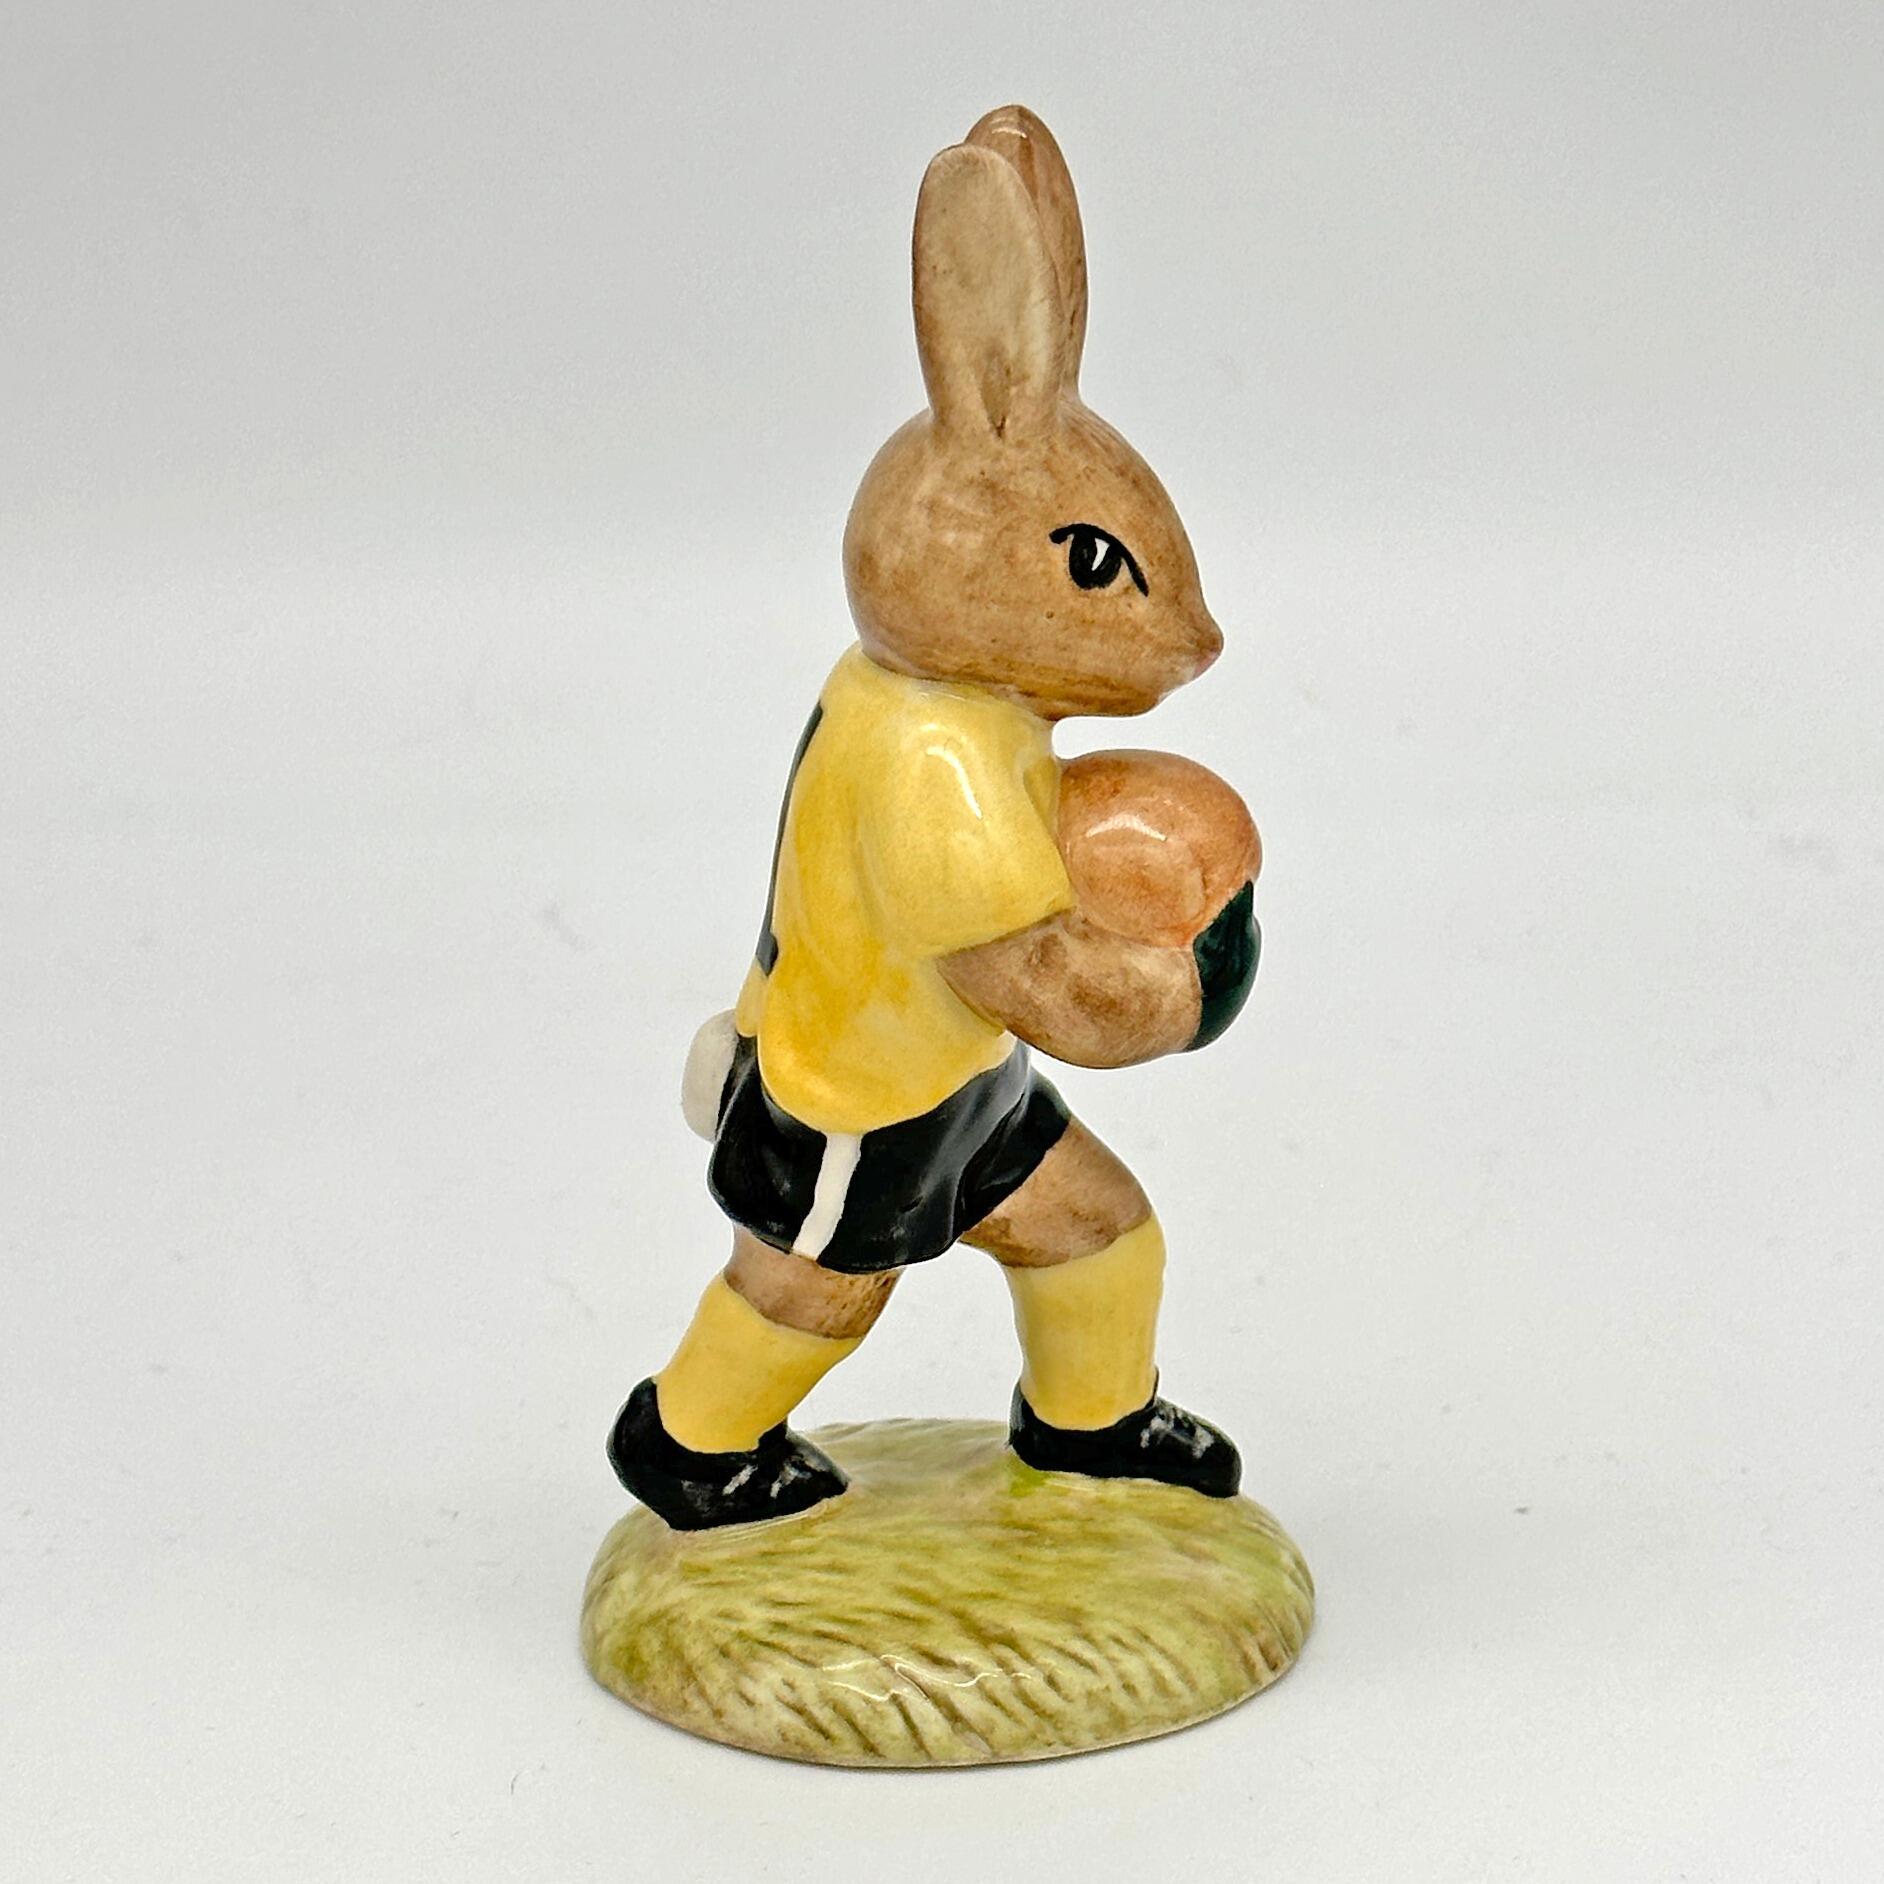 Royal Doulton Bunnykins figure - DB120 Goalkeeper in Yellow and Black - right